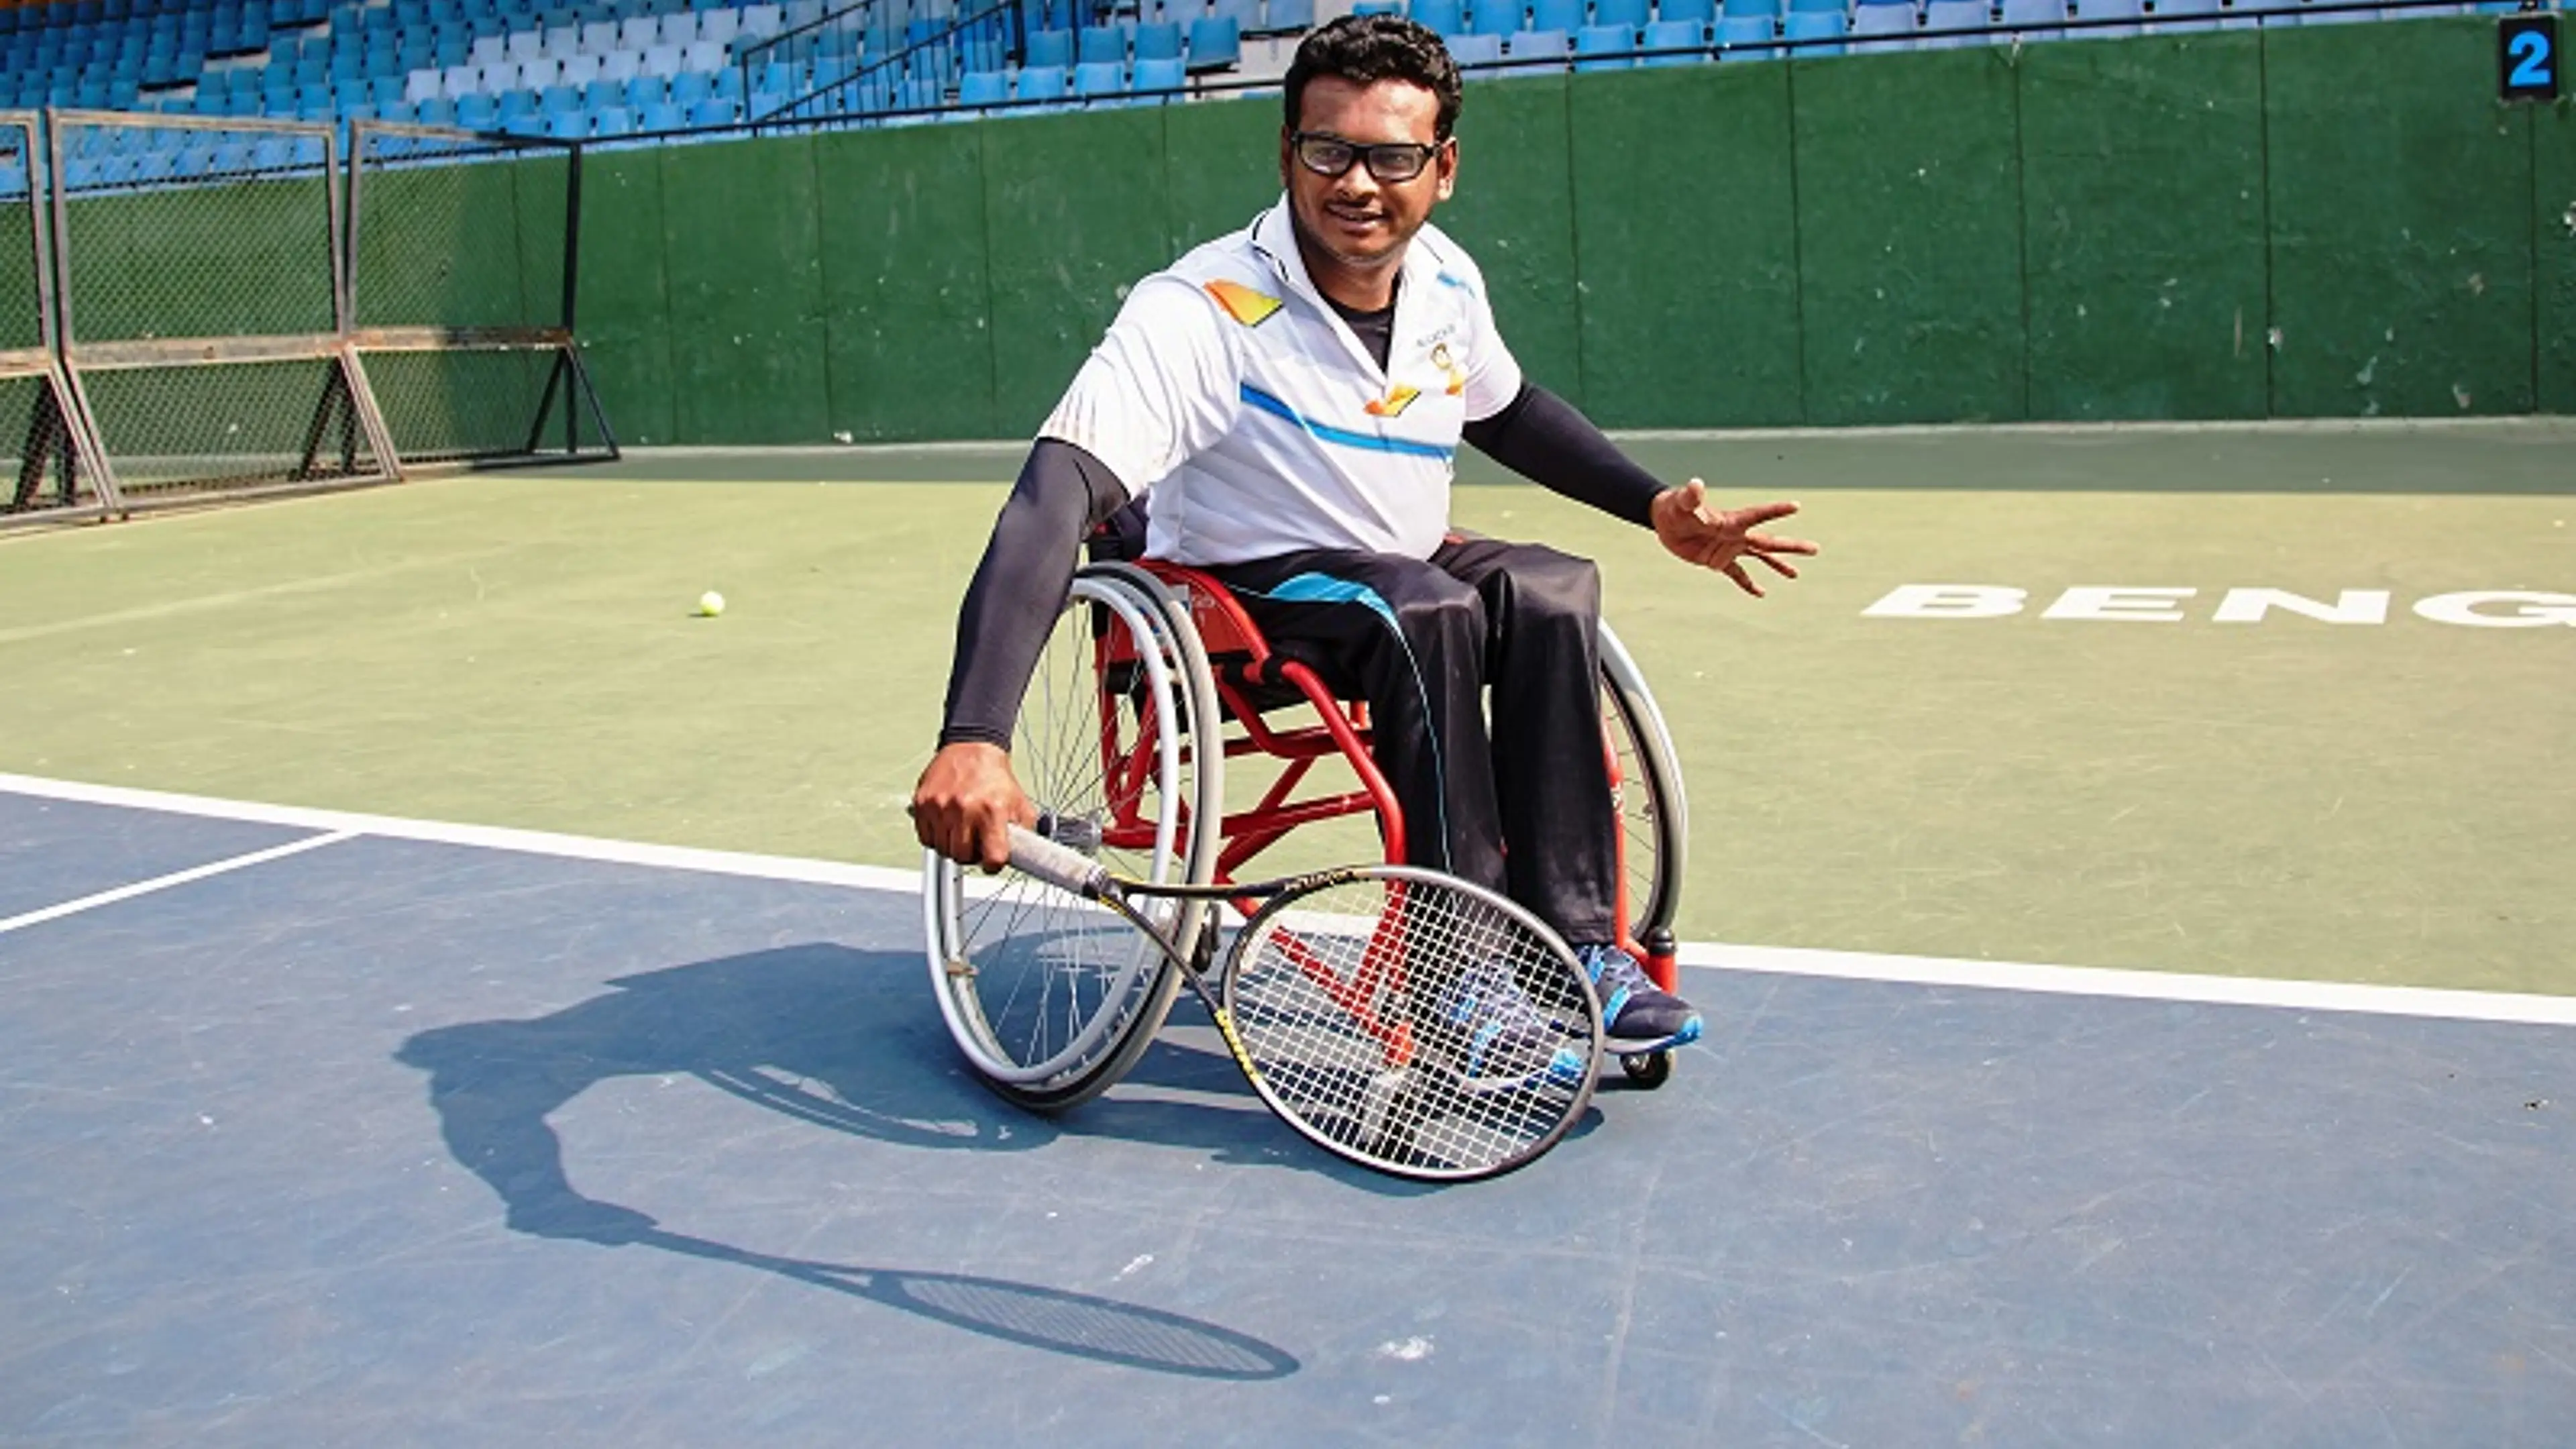 Polio at 2, represented India at Wheelchair Tennis at 28 – Shiva Prasad’s extraordinary story of success despite all odds